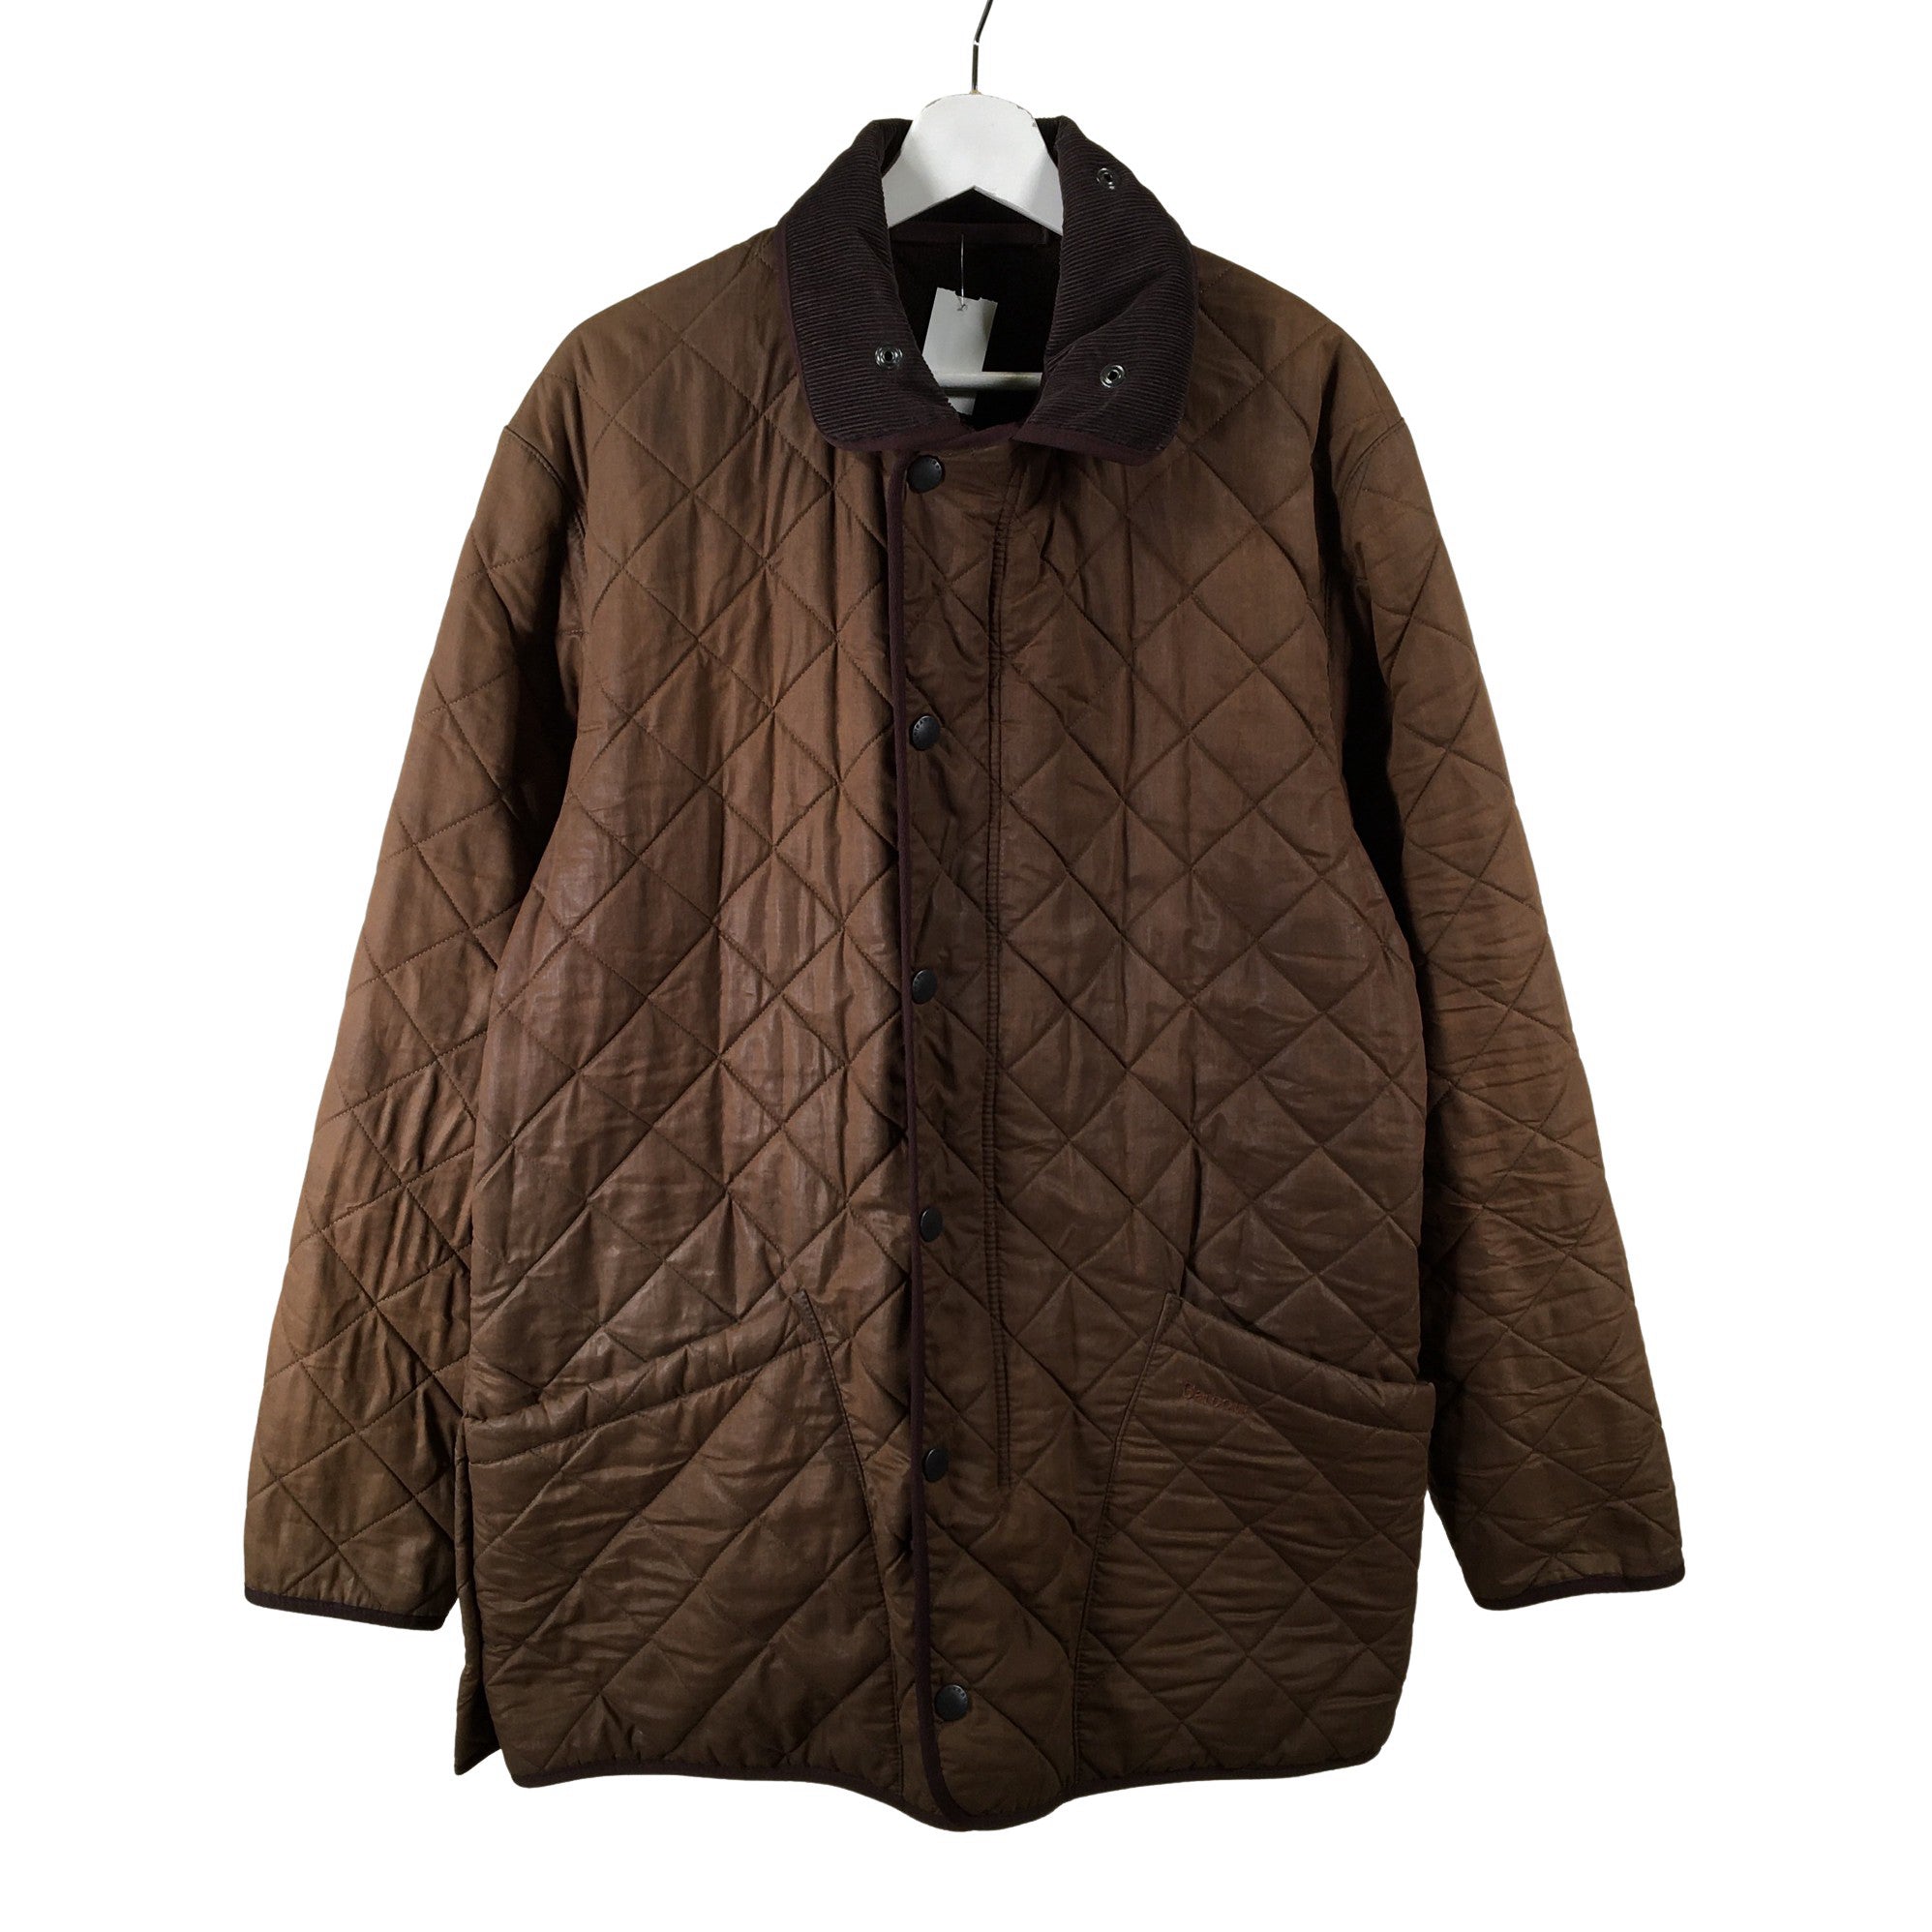 Men's Barbour Quilted jacket, size M (Brown) | Emmy